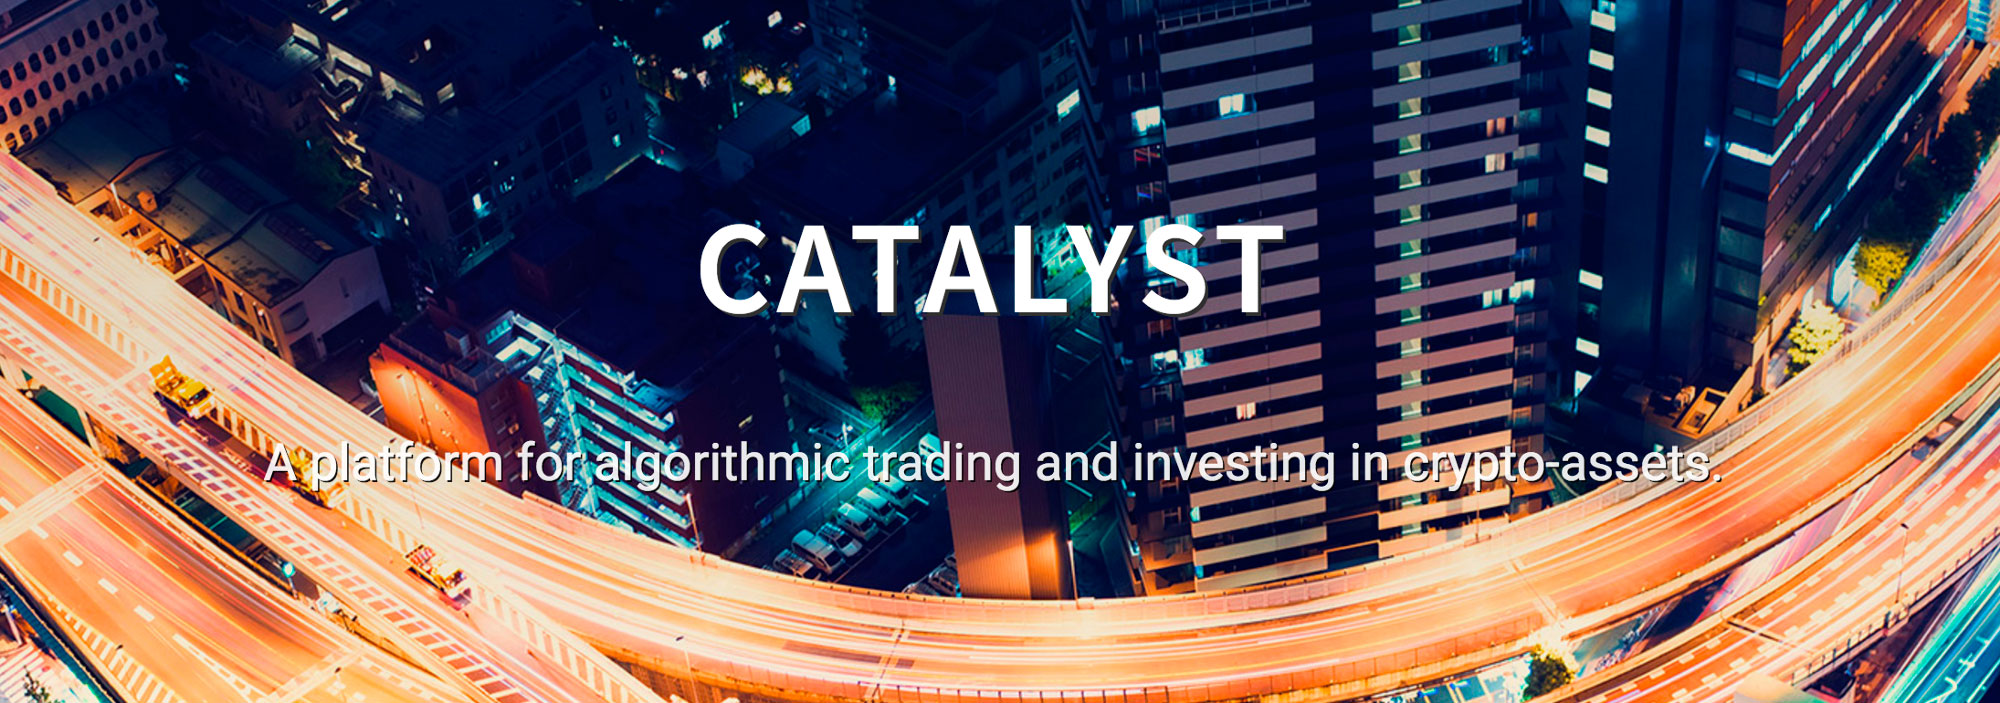 catalyst crypto-assets